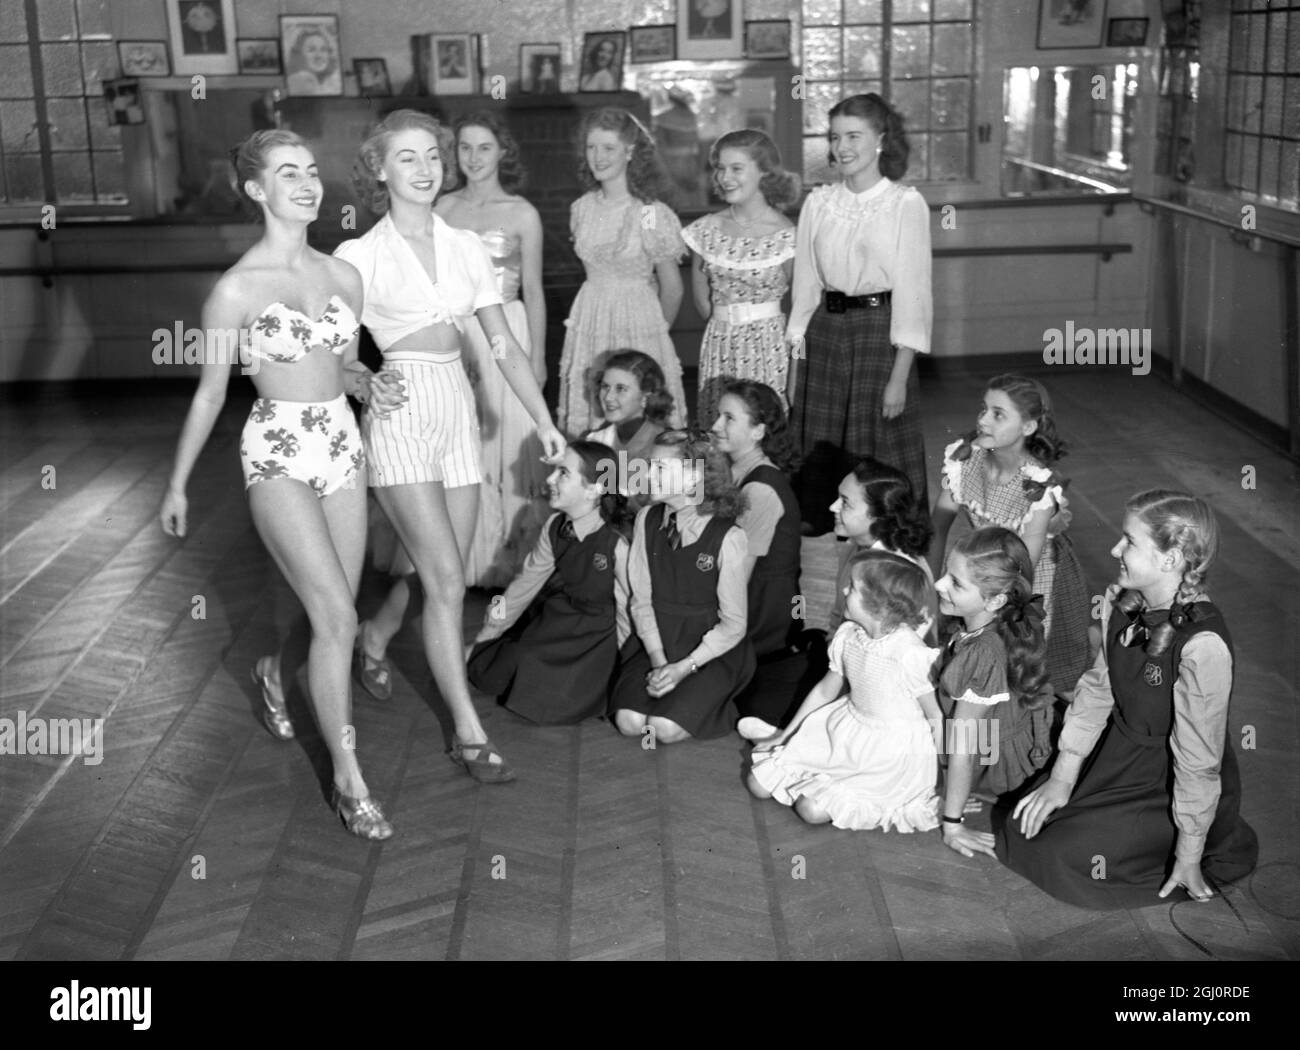 Model schoolgirl to star in schoolgirls fashion show at the Dorchester Hotel The perfect schoolgirl , seventeen year old Yvonne Marsh , will be the star of a display of children's and teenage fashions at the Dorchester on 6 November 1950. She will show evening gowns , sportswear and day clothes with nineteen other girls , all trained to walk with the assured air of mannequins . Left to right : Jean Marsh , aged 16 , with her sister Yvonne Marsh , age 17 , the perfect schoolgirl , show off beachwear at the Aida Foster School watched by other girls who will also be in the show Stock Photo